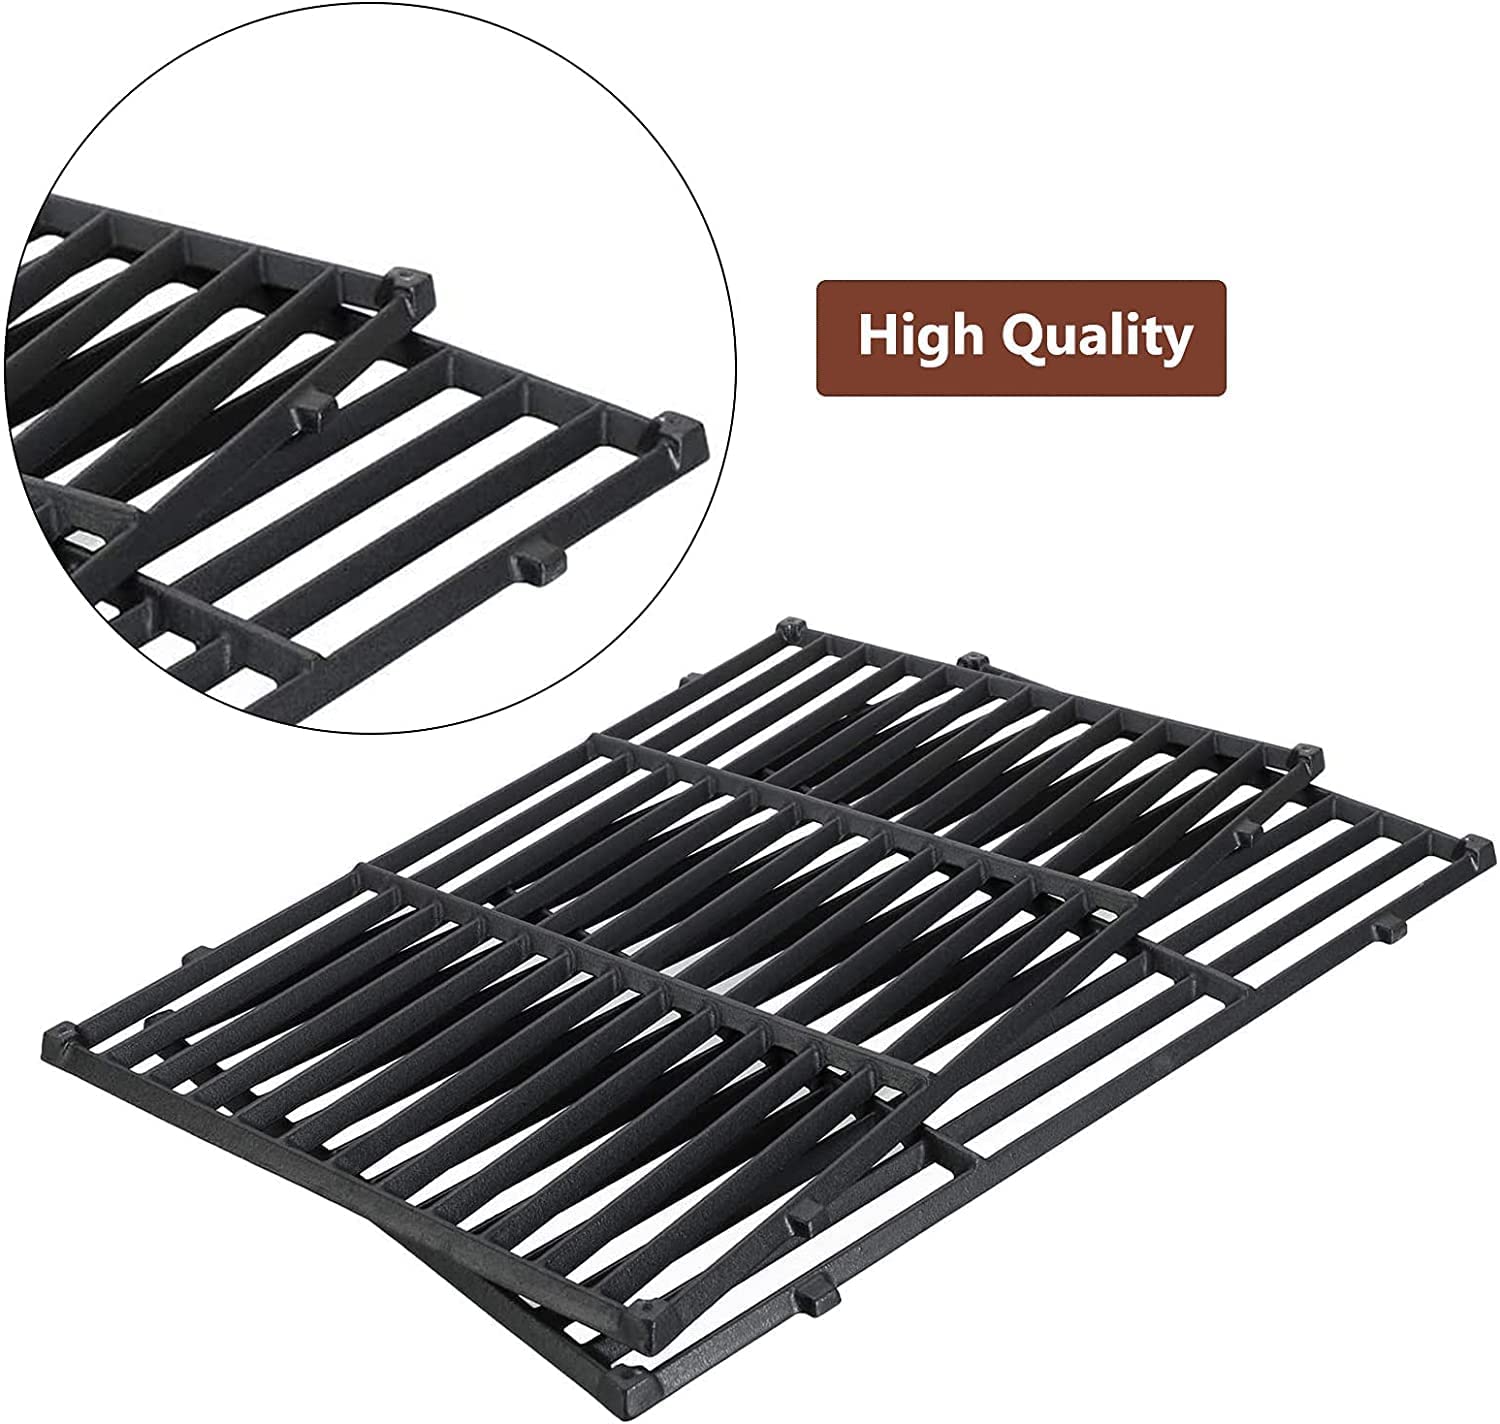 Grisun 18.7" Cooking Grates for Weber Genesis II 400 and Genesis II LX 400 Series Gas Grills, Cast Iron Replacement Parts for Weber 66089 66097, Set of 3 - image 5 of 7